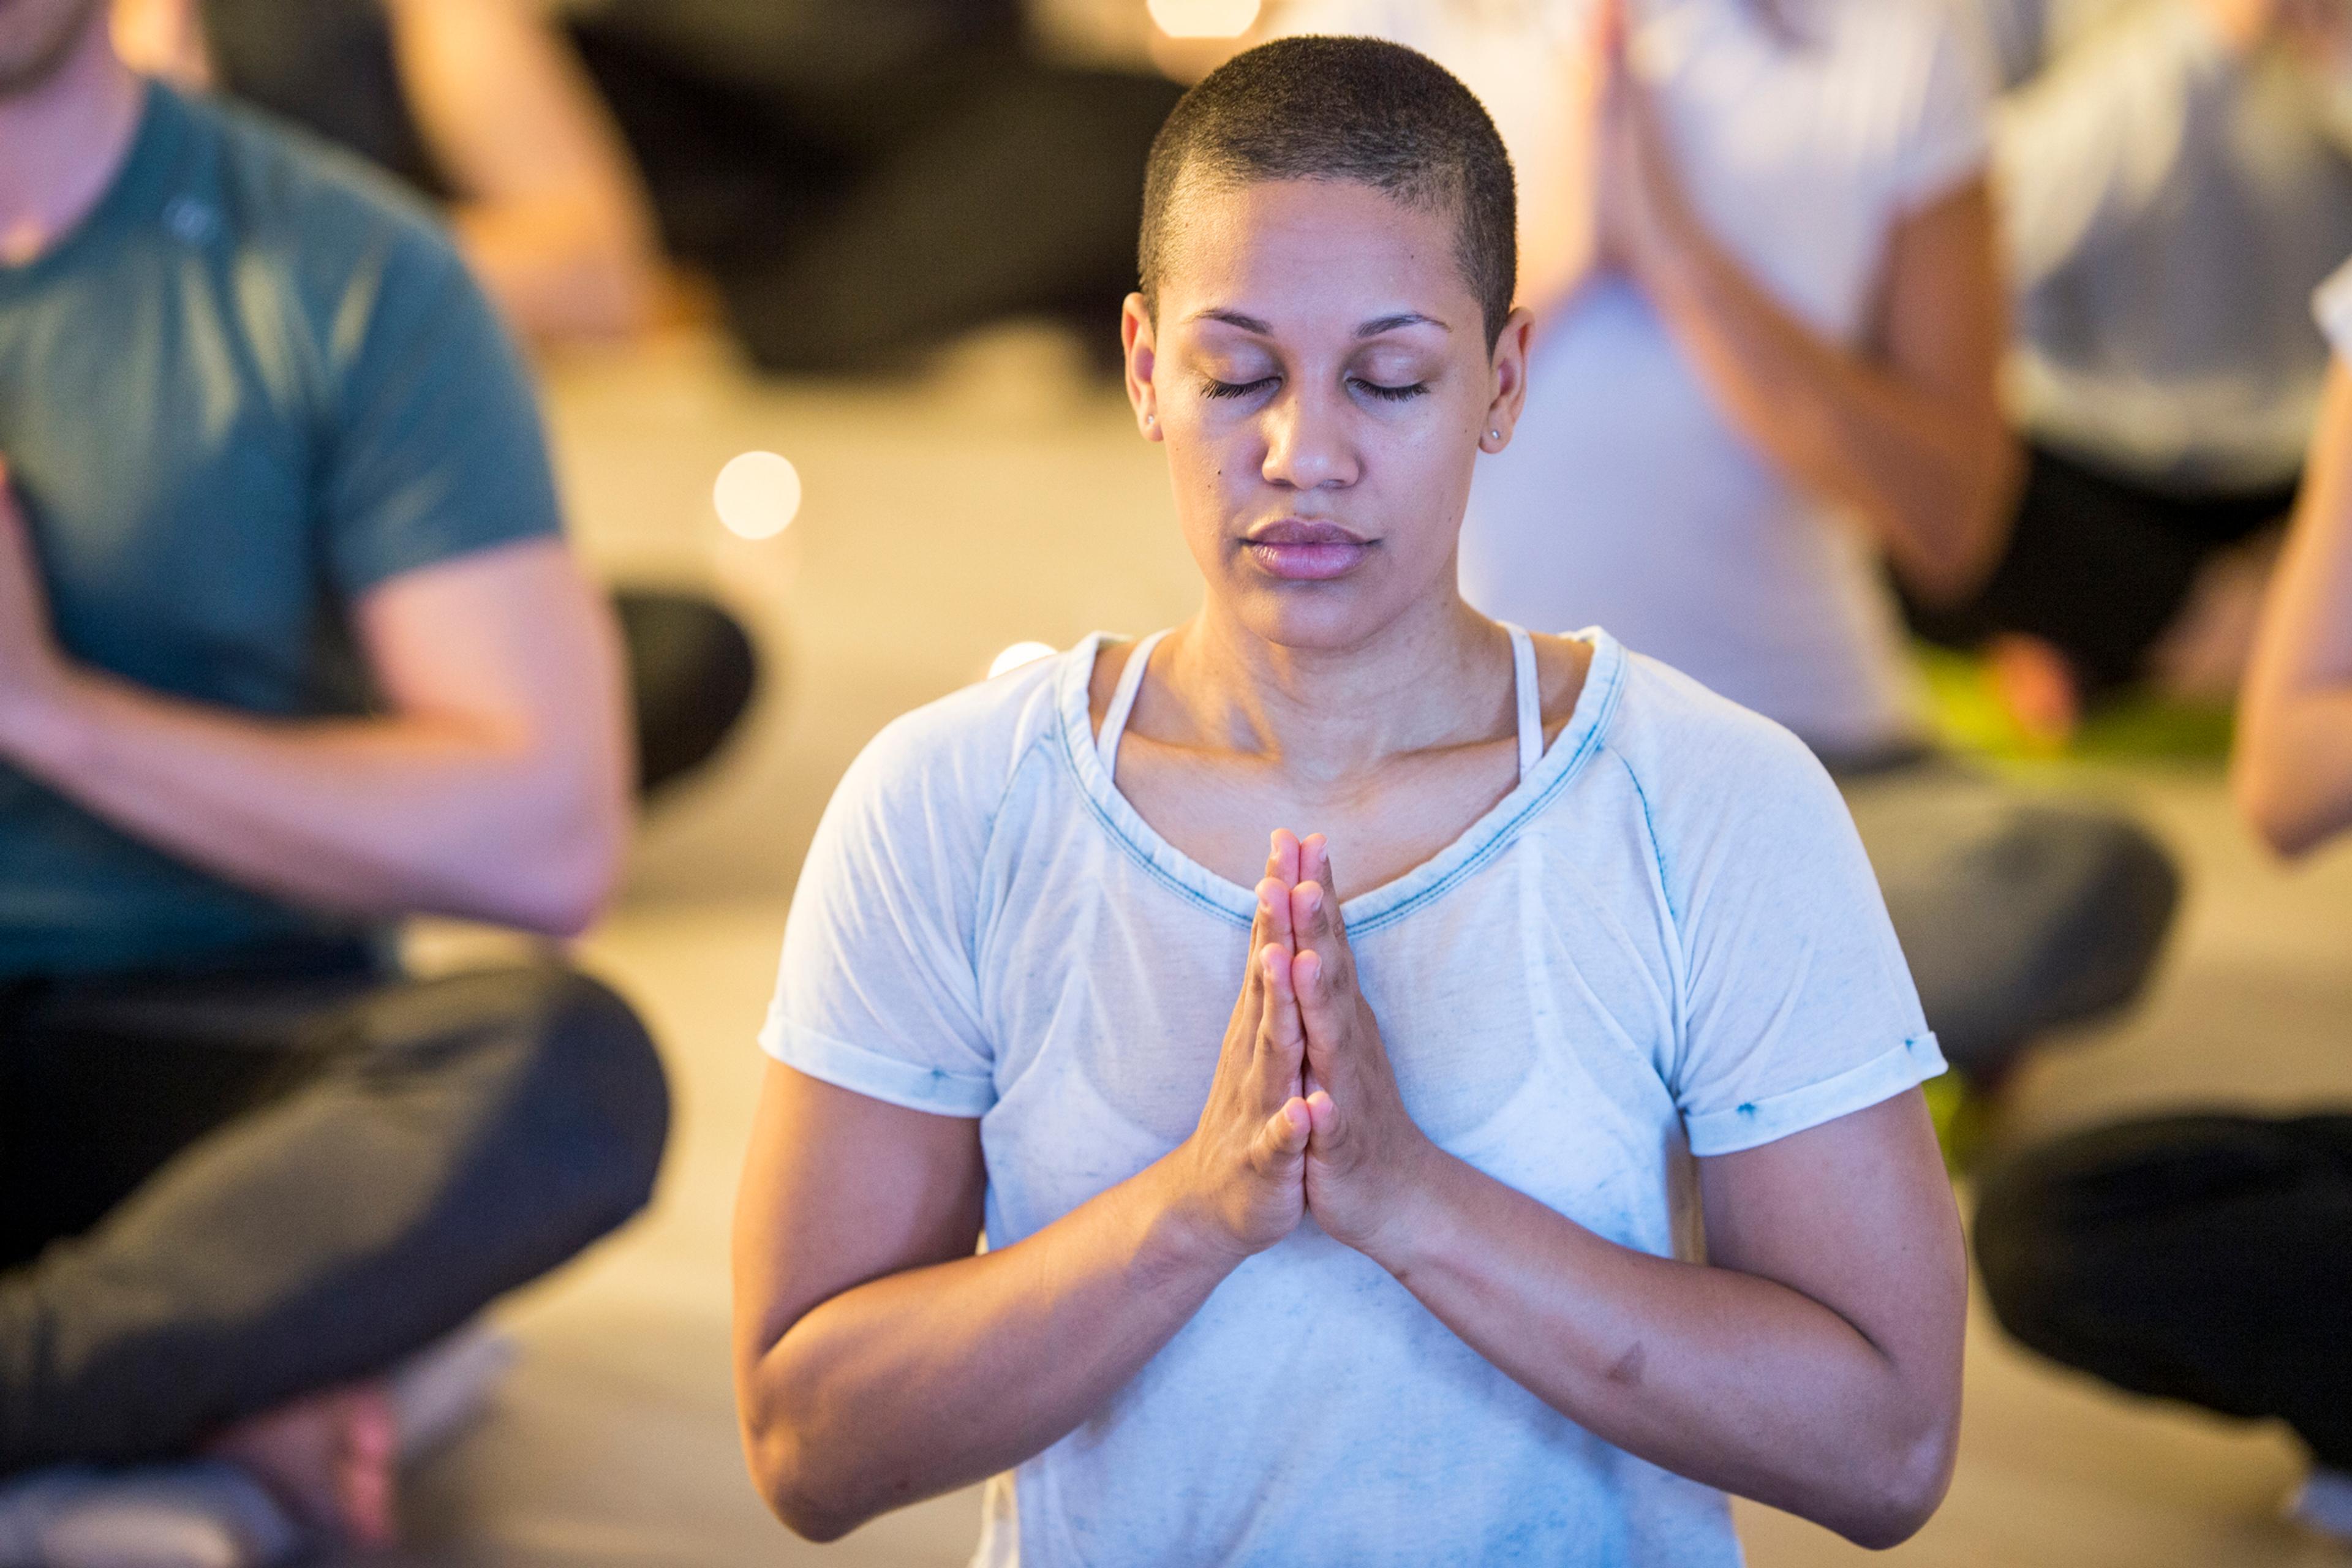 A woman with her hands in prayer position is sat cross-legged in a room of people meditating with her eyes closed.